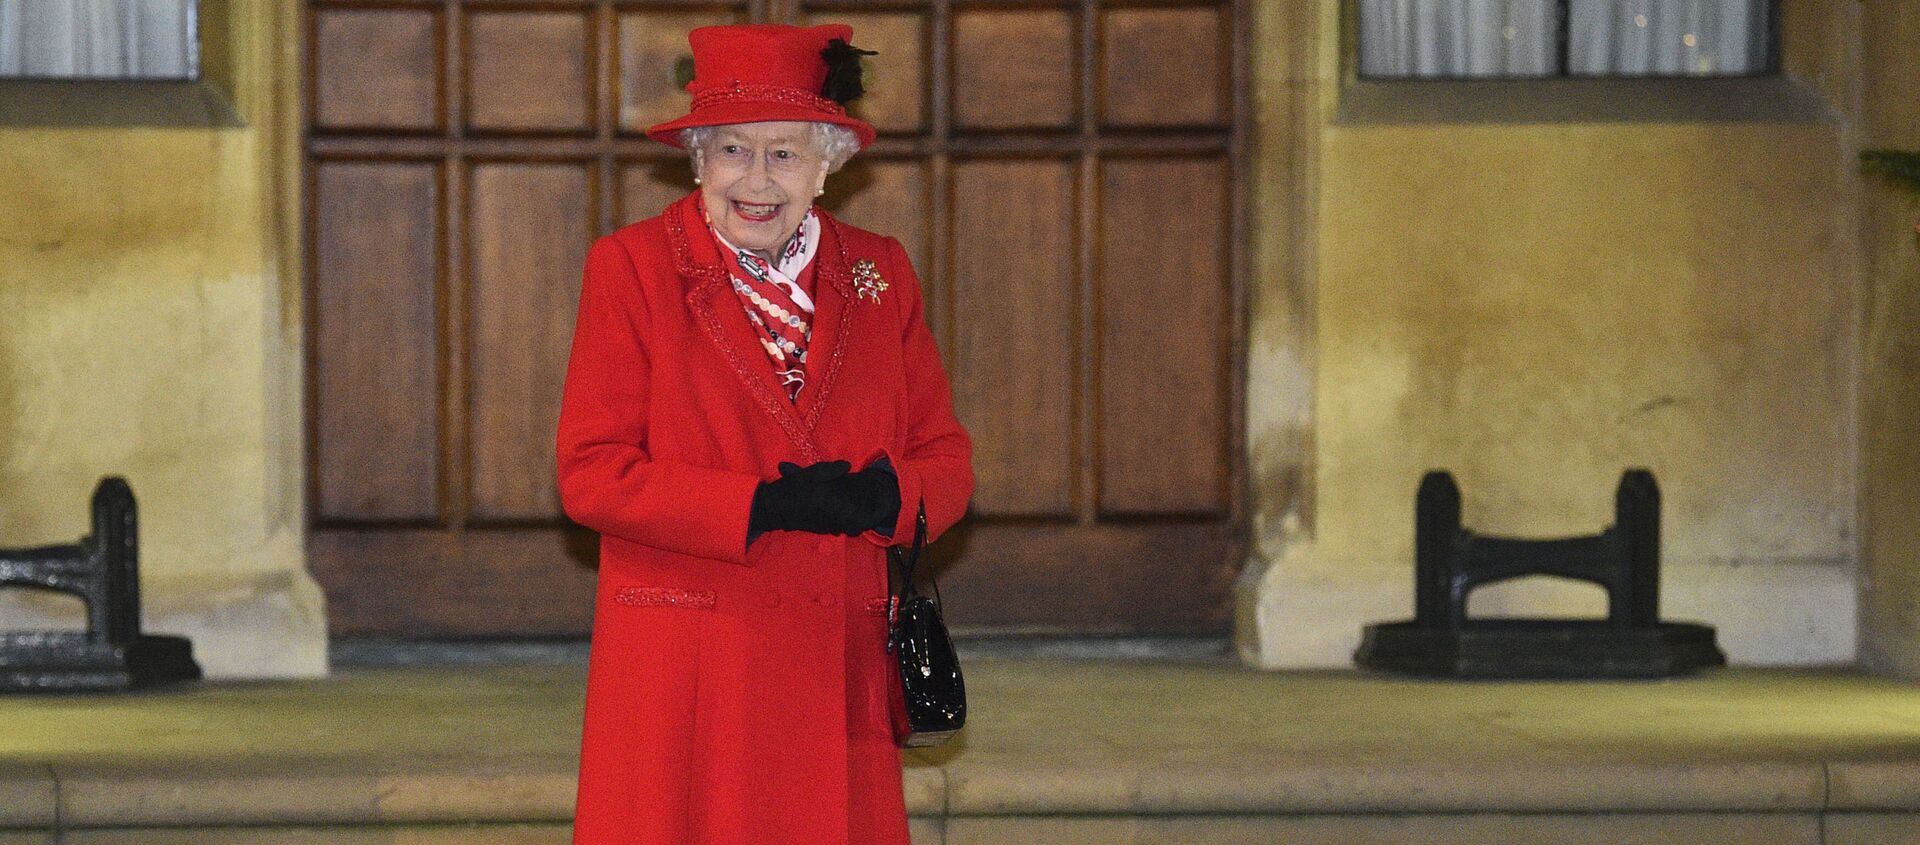 Britain's Queen Elizabeth II, along with other members of the royal family, stands in the quadrangle at Windsor Castle, Windsor, England, Tuesday Dec. 8, 2020, to meet and thank members of the Salvation Army and local volunteers and key workers from organisations and charities in Berkshire. - Sputnik International, 1920, 06.03.2021